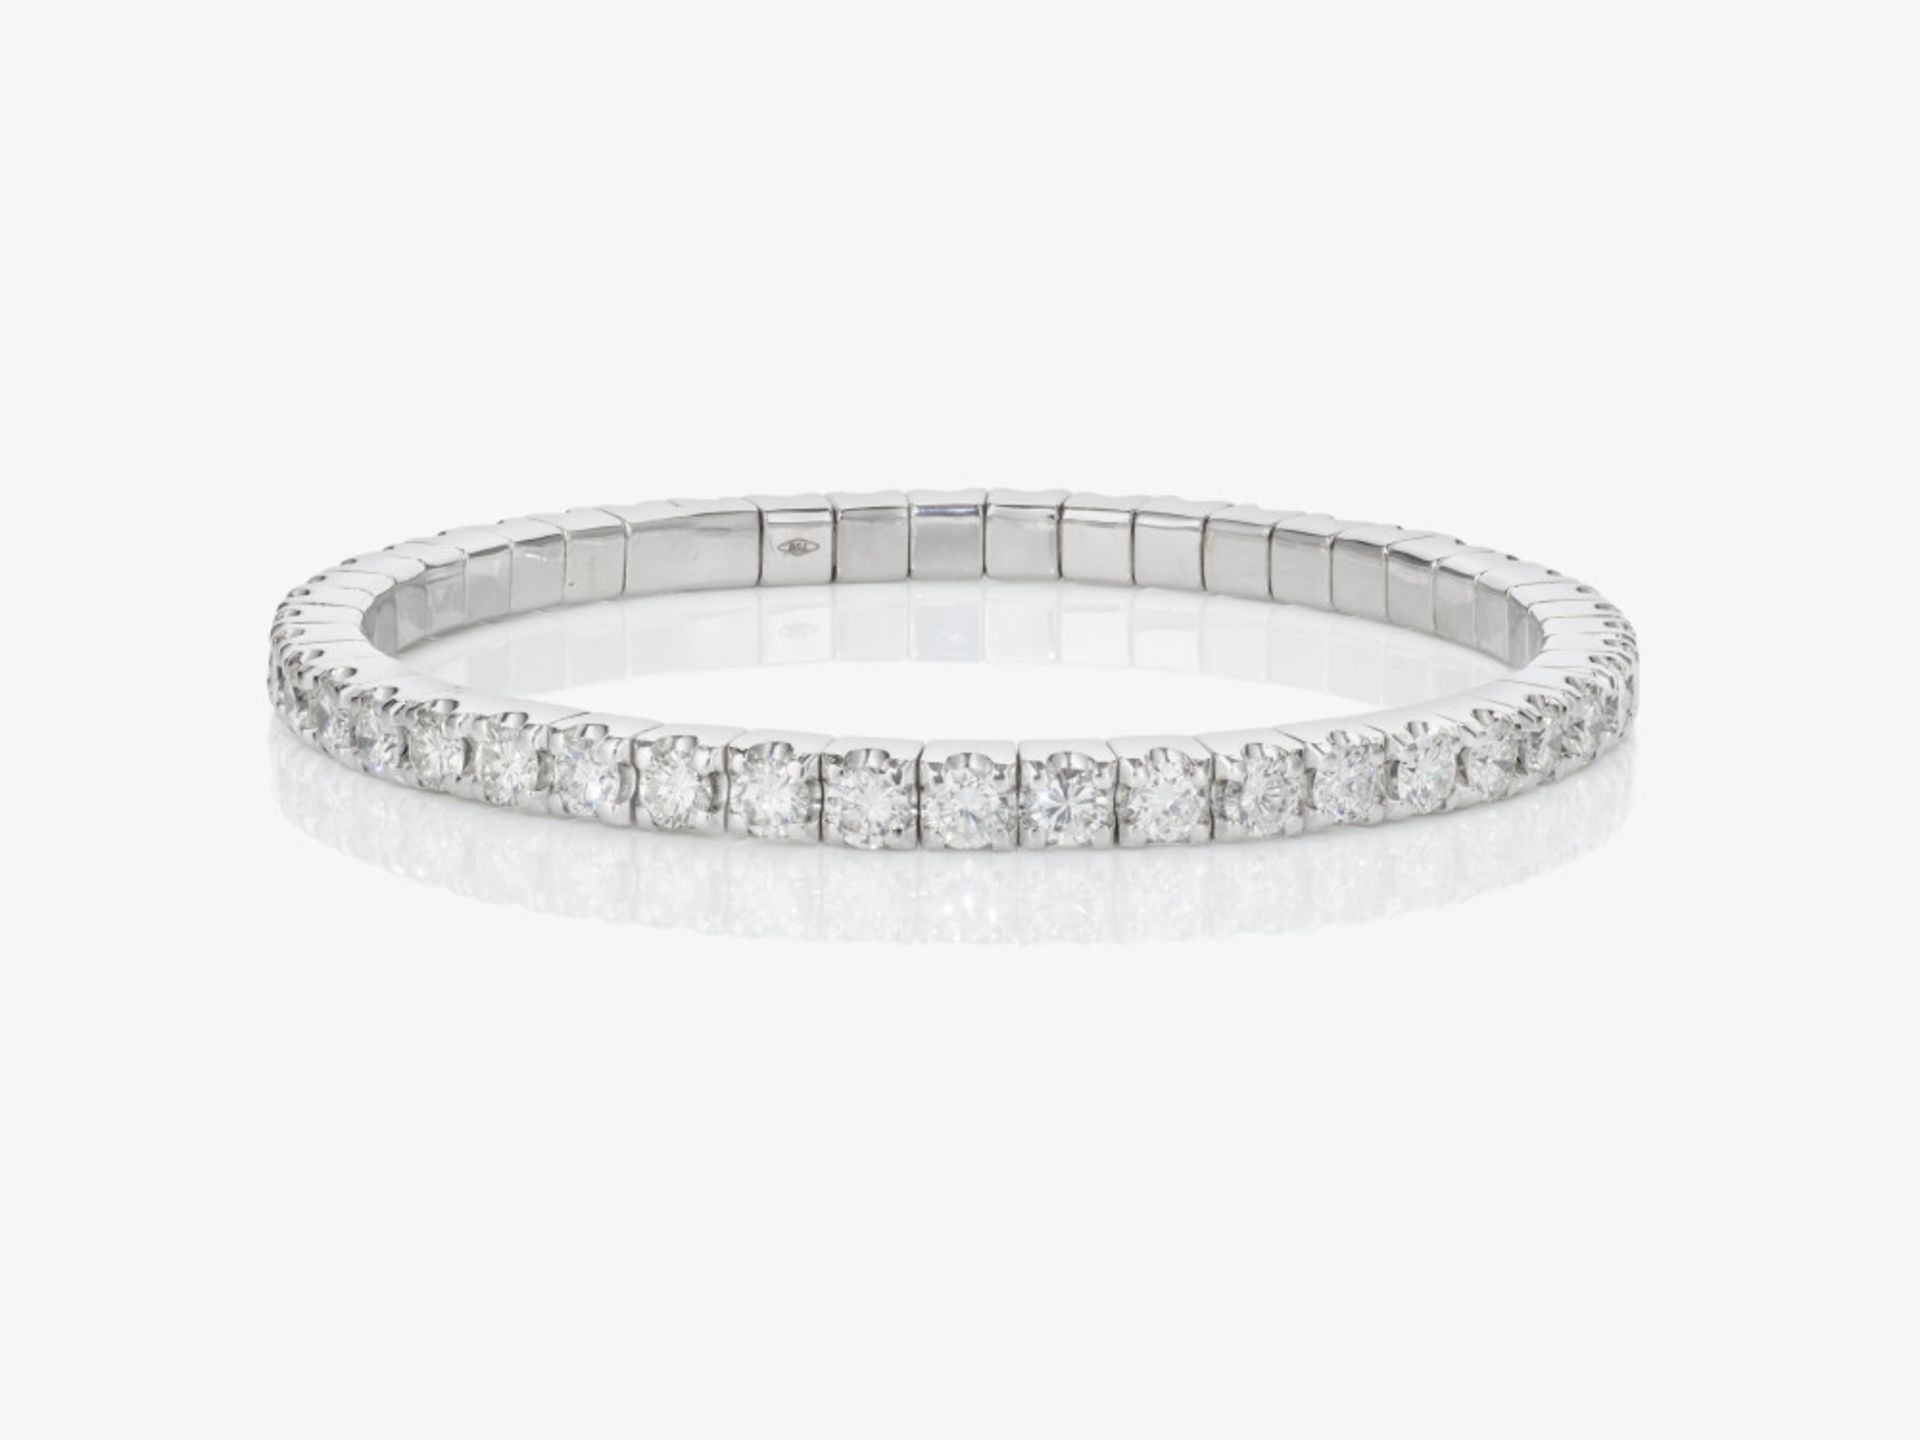 A flexibly stretchable Rivière bracelet decorated with brilliant-cut diamonds - Italy